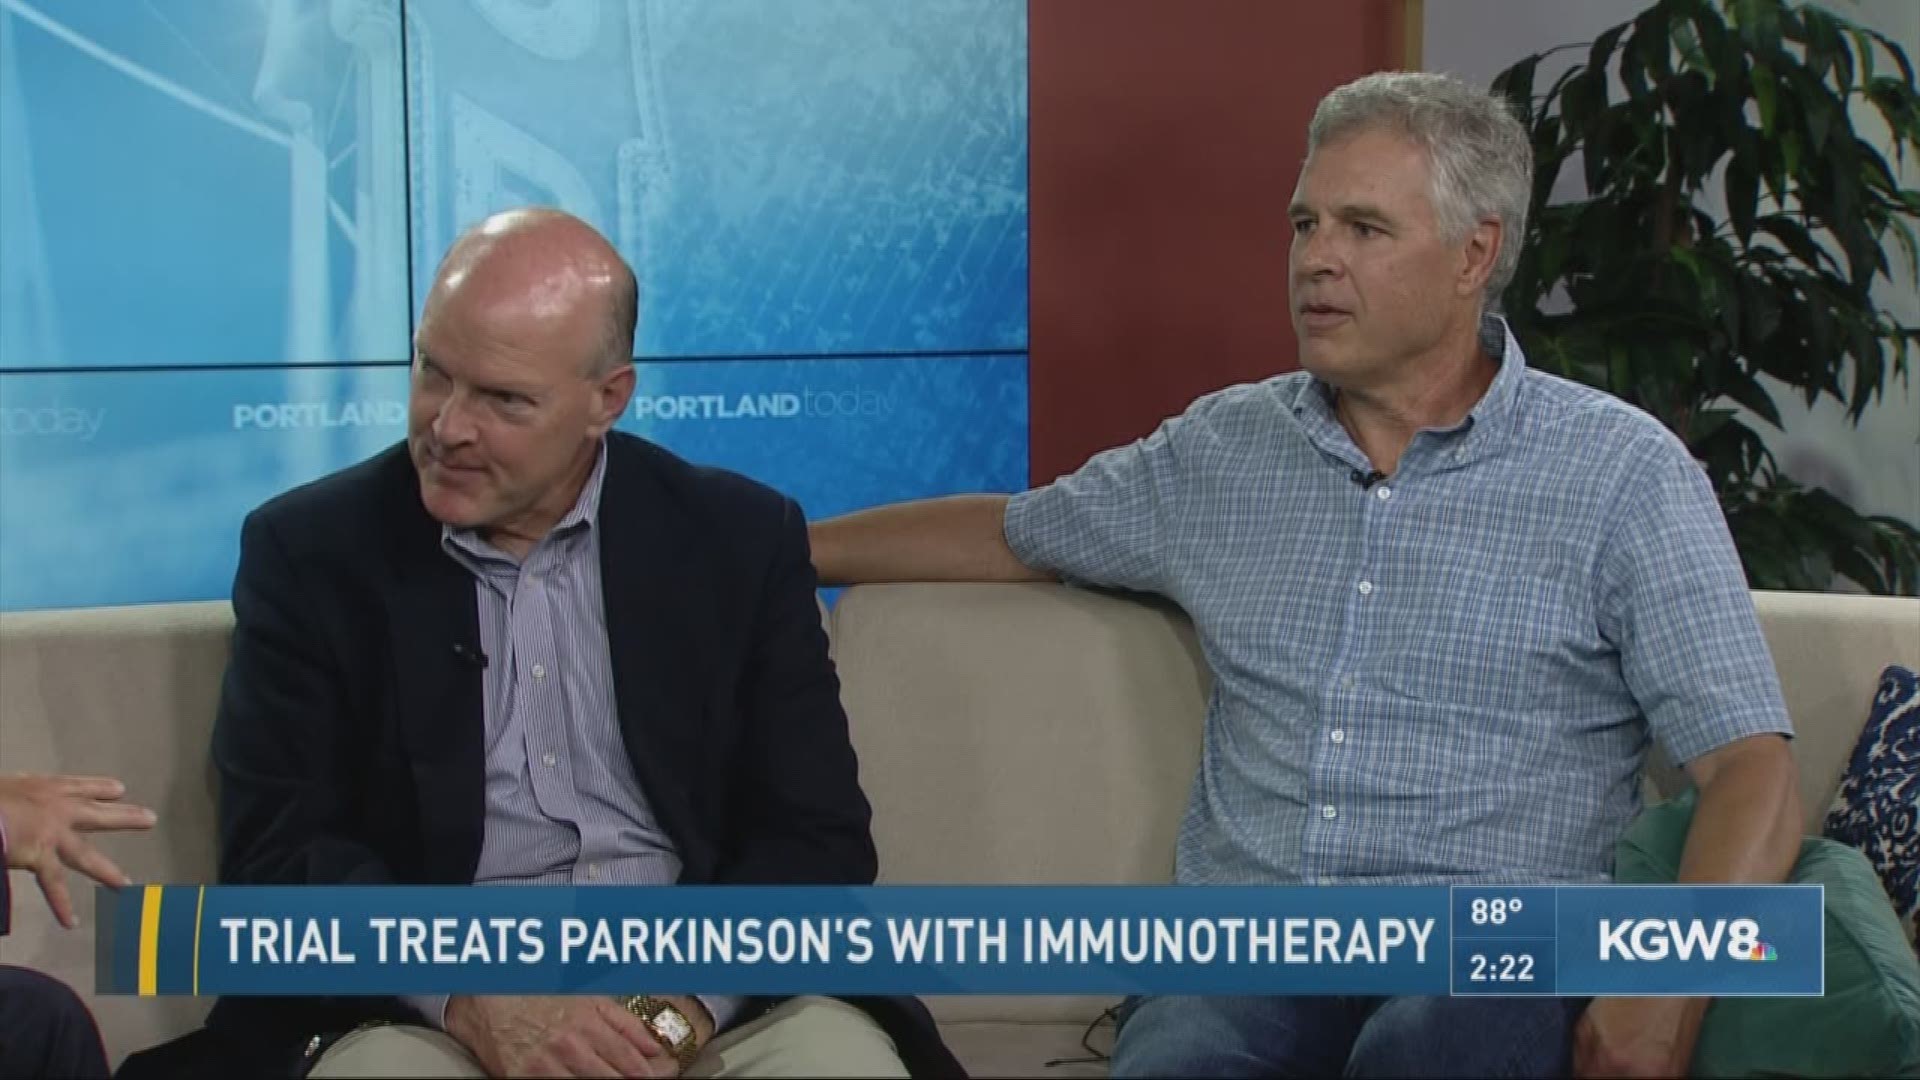 Trial treats Parkinson's with immunotherapy